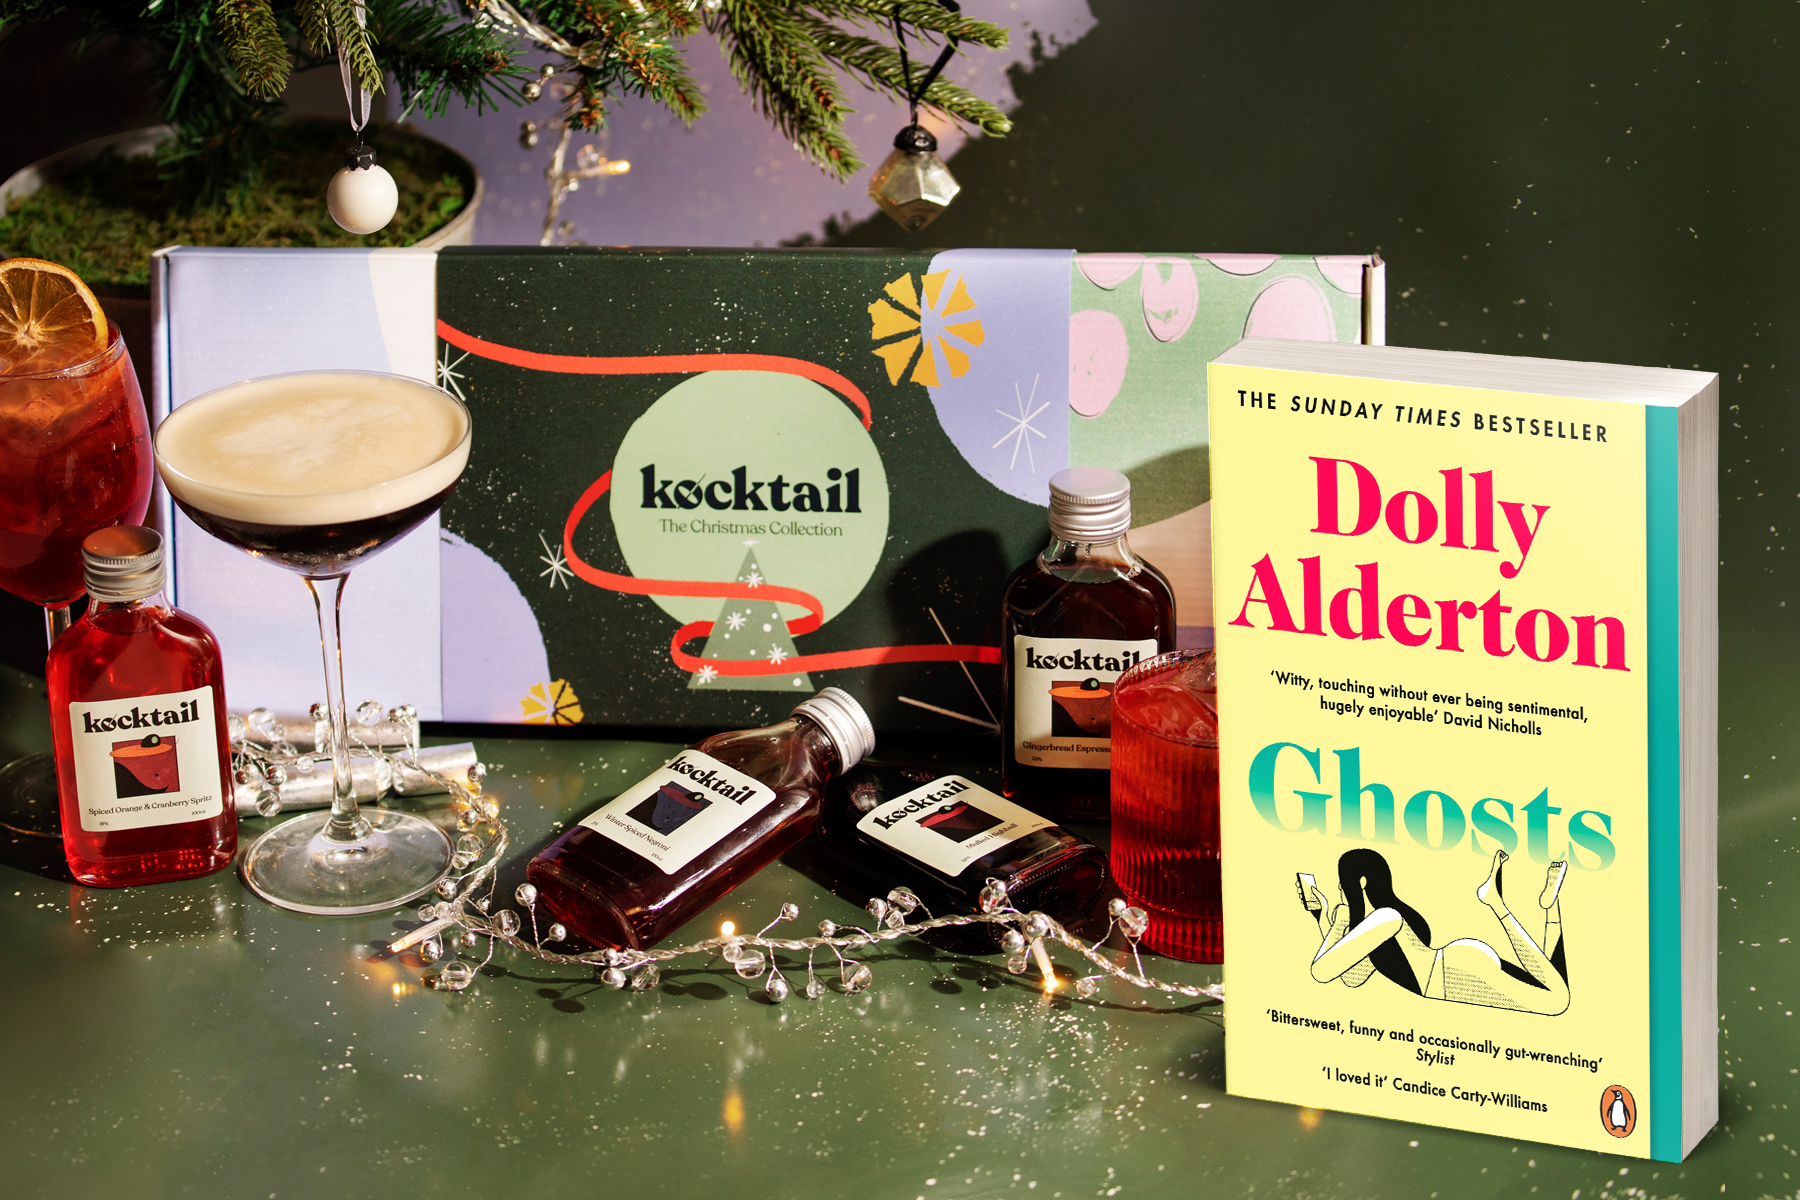 /content/dam/prh/articles/adults/2021/december/Dolly-Alderton-Ghosts-competition-1800x1200px.jpg